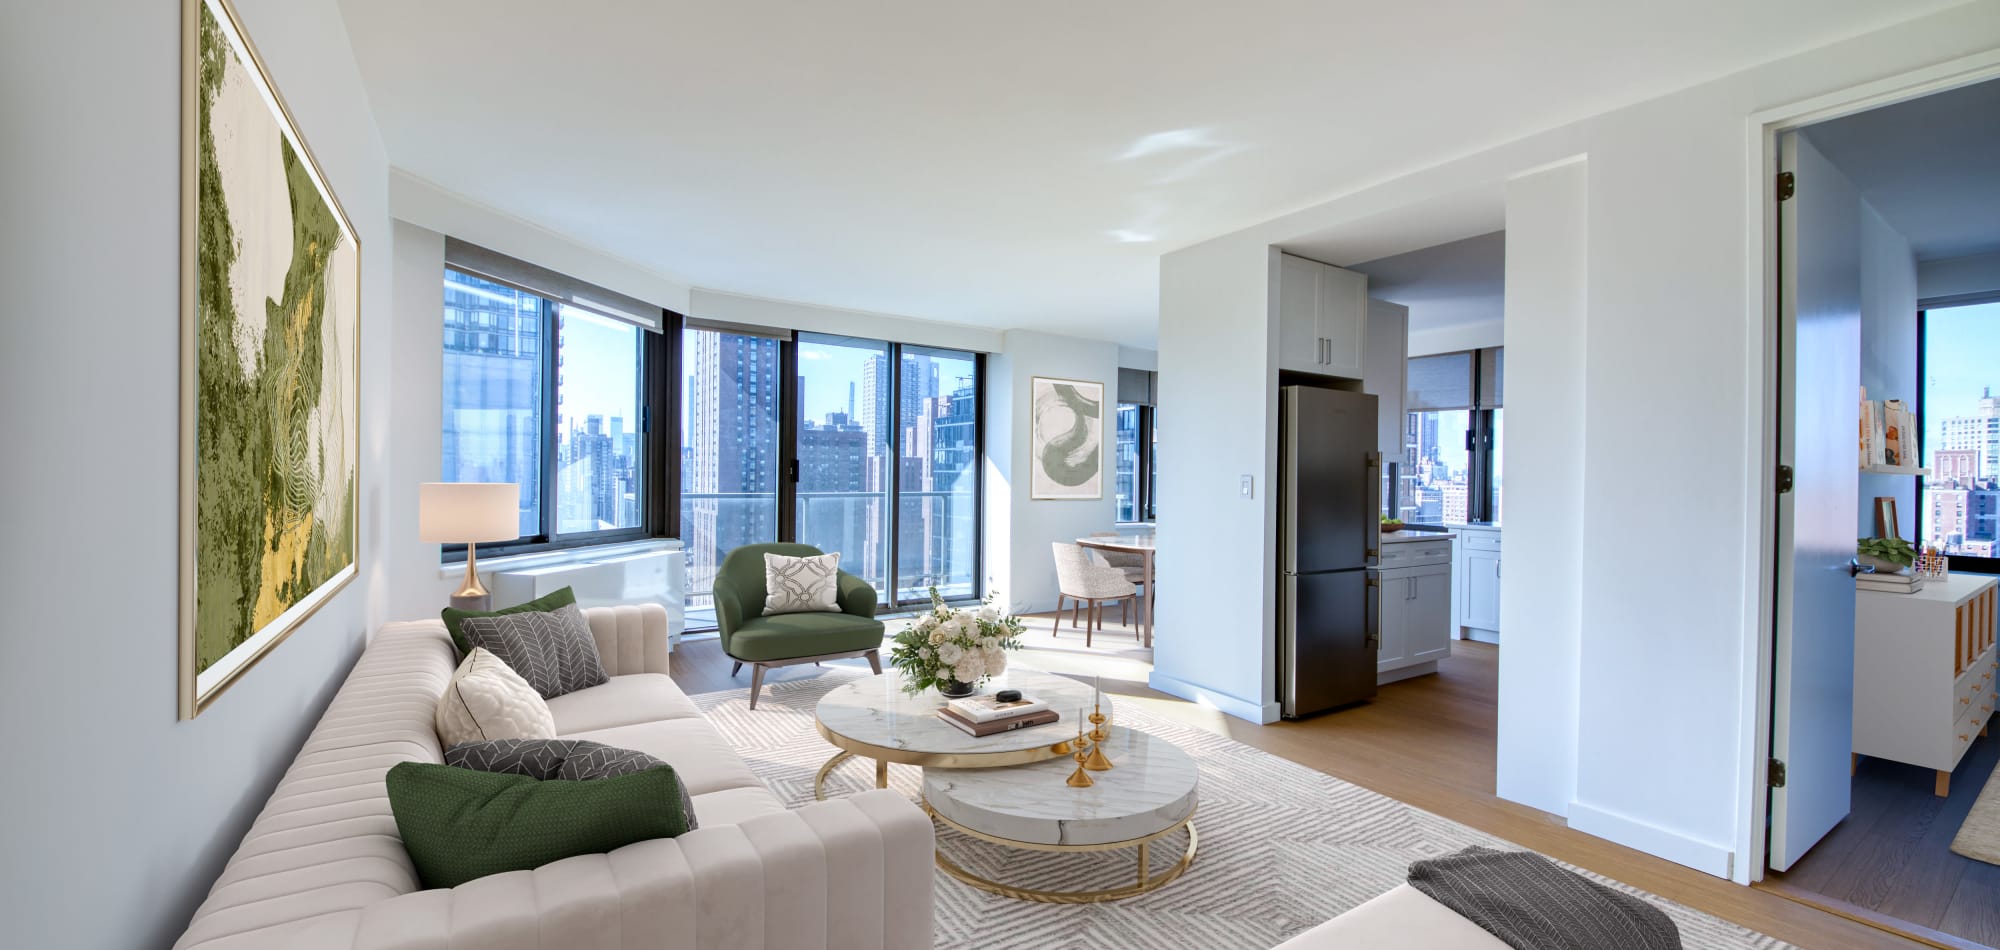 Beautiful living room with spectacular views at 301 E 94th Street in New York, New York